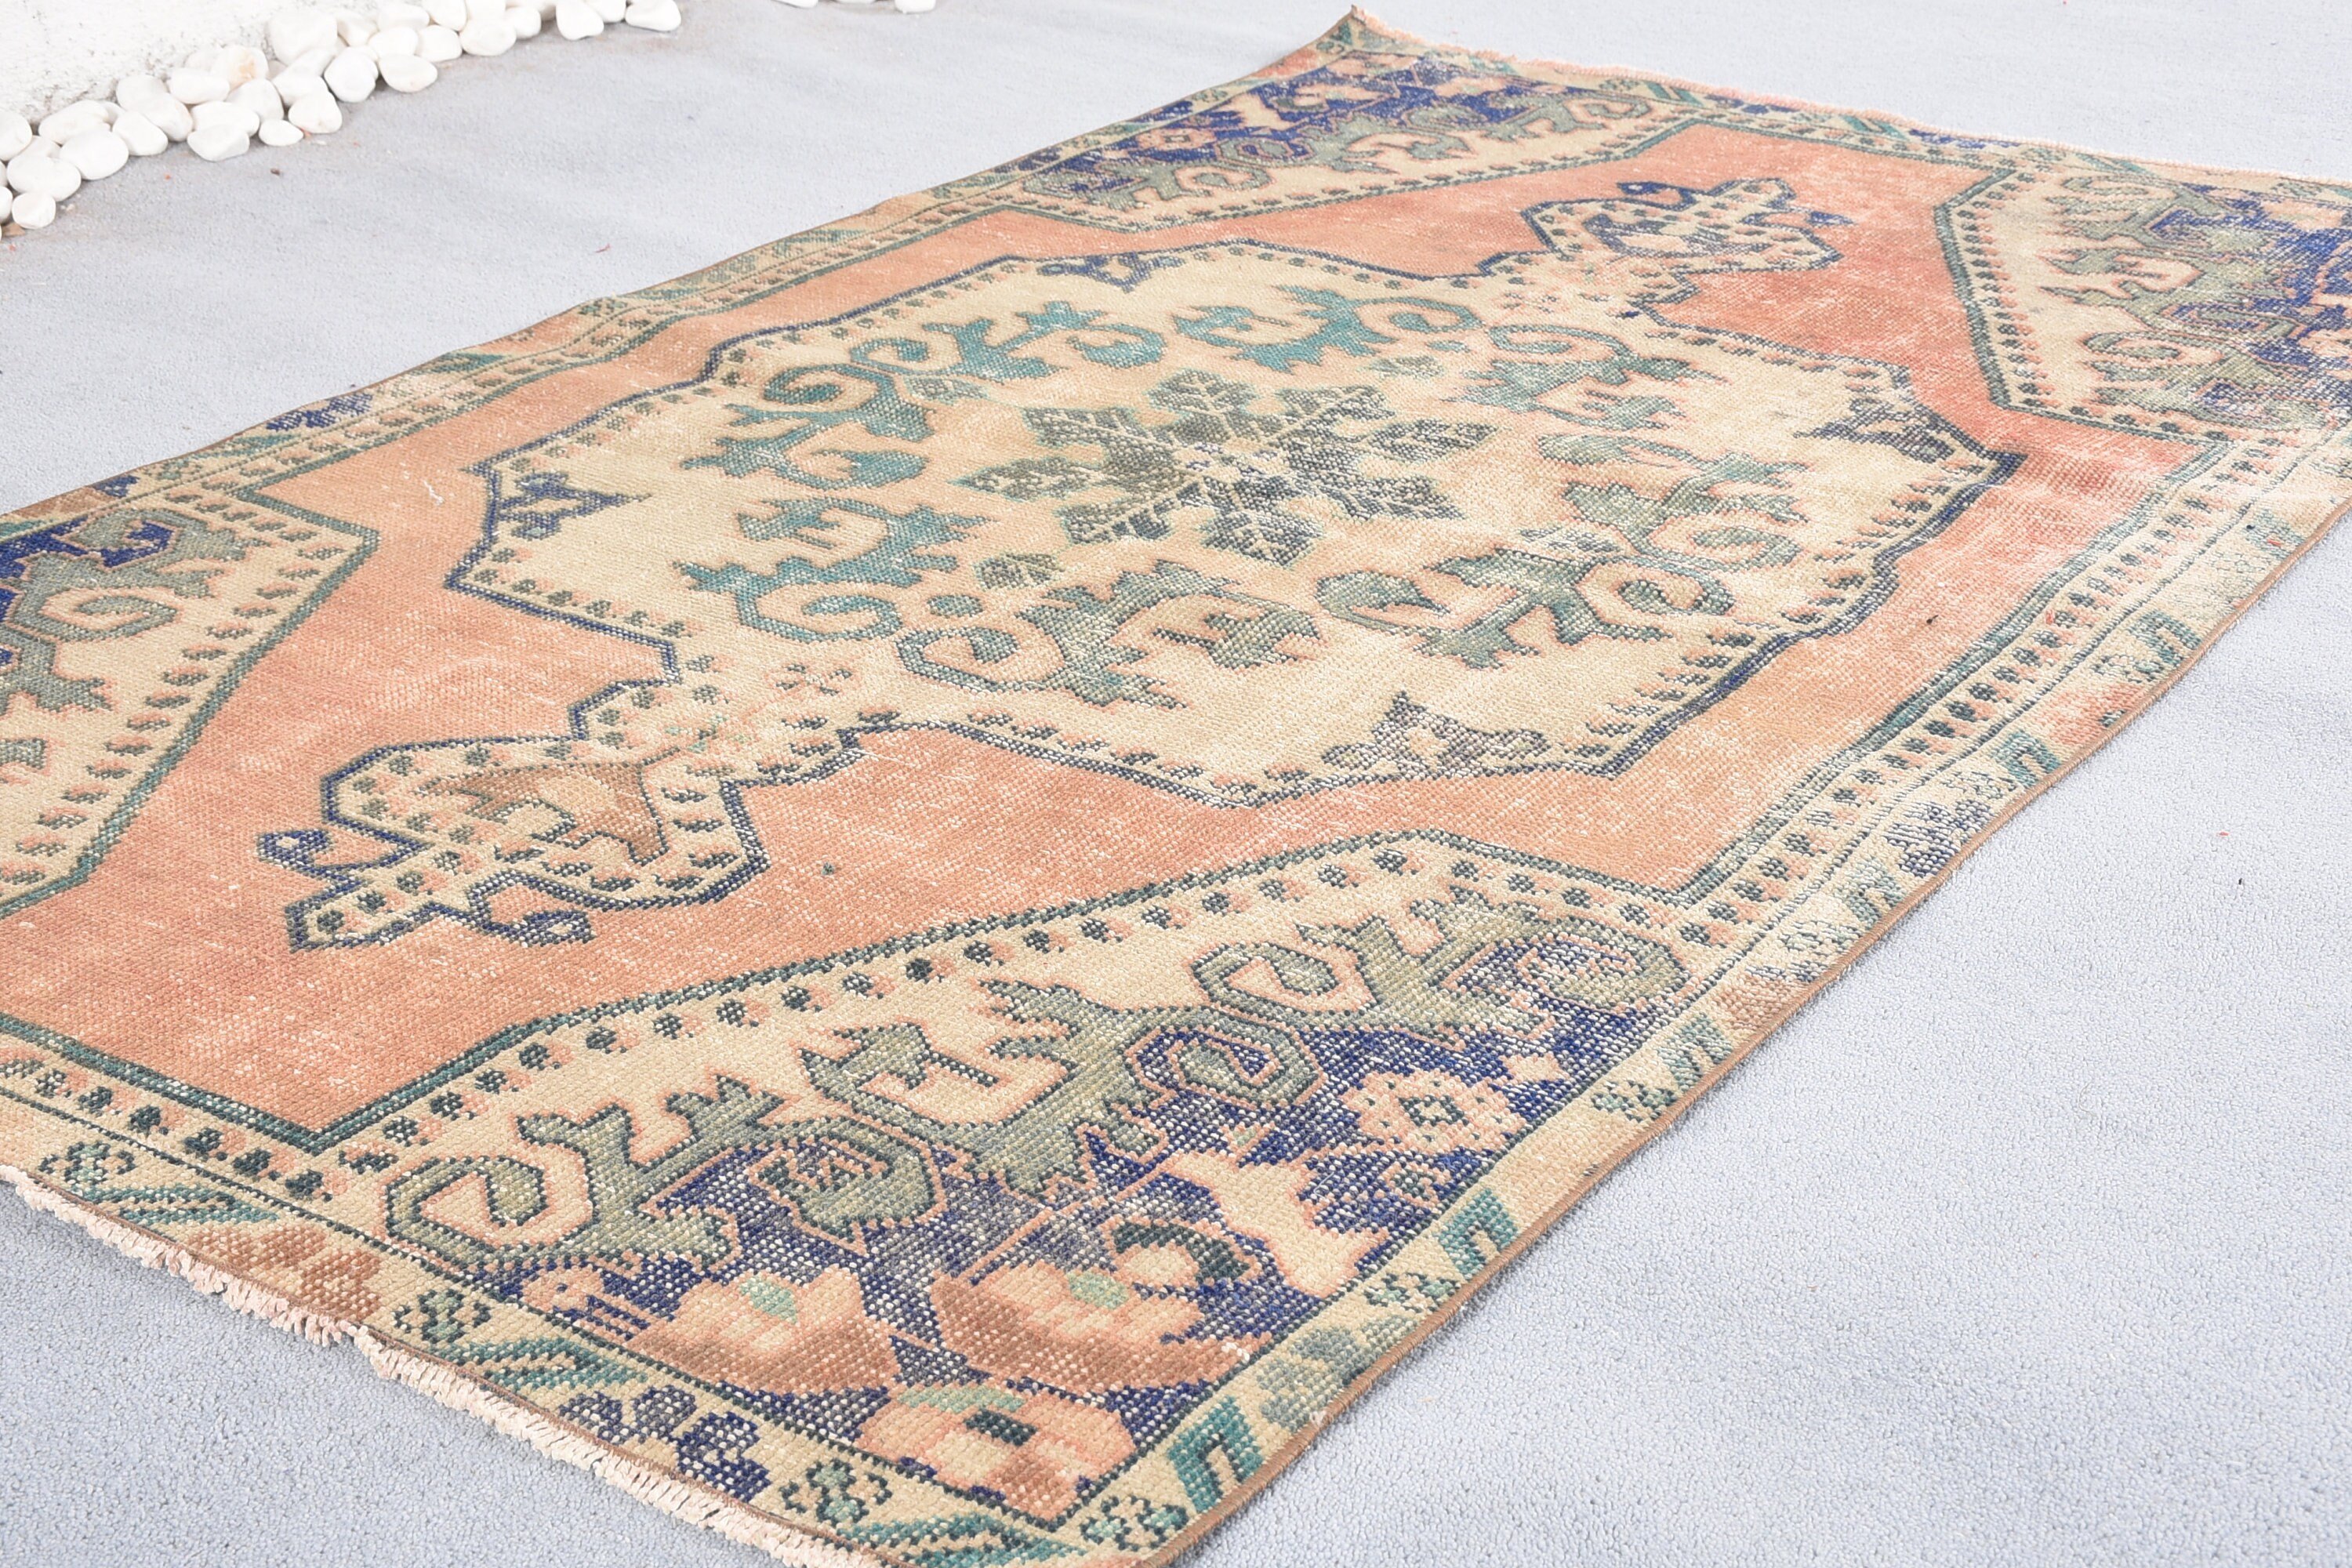 Rugs for Dining Room, Turkish Rug, Moroccan Rugs, Vintage Decor Rugs, Vintage Rugs, Brown Kitchen Rugs, Antique Rug, 4x6.6 ft Area Rugs